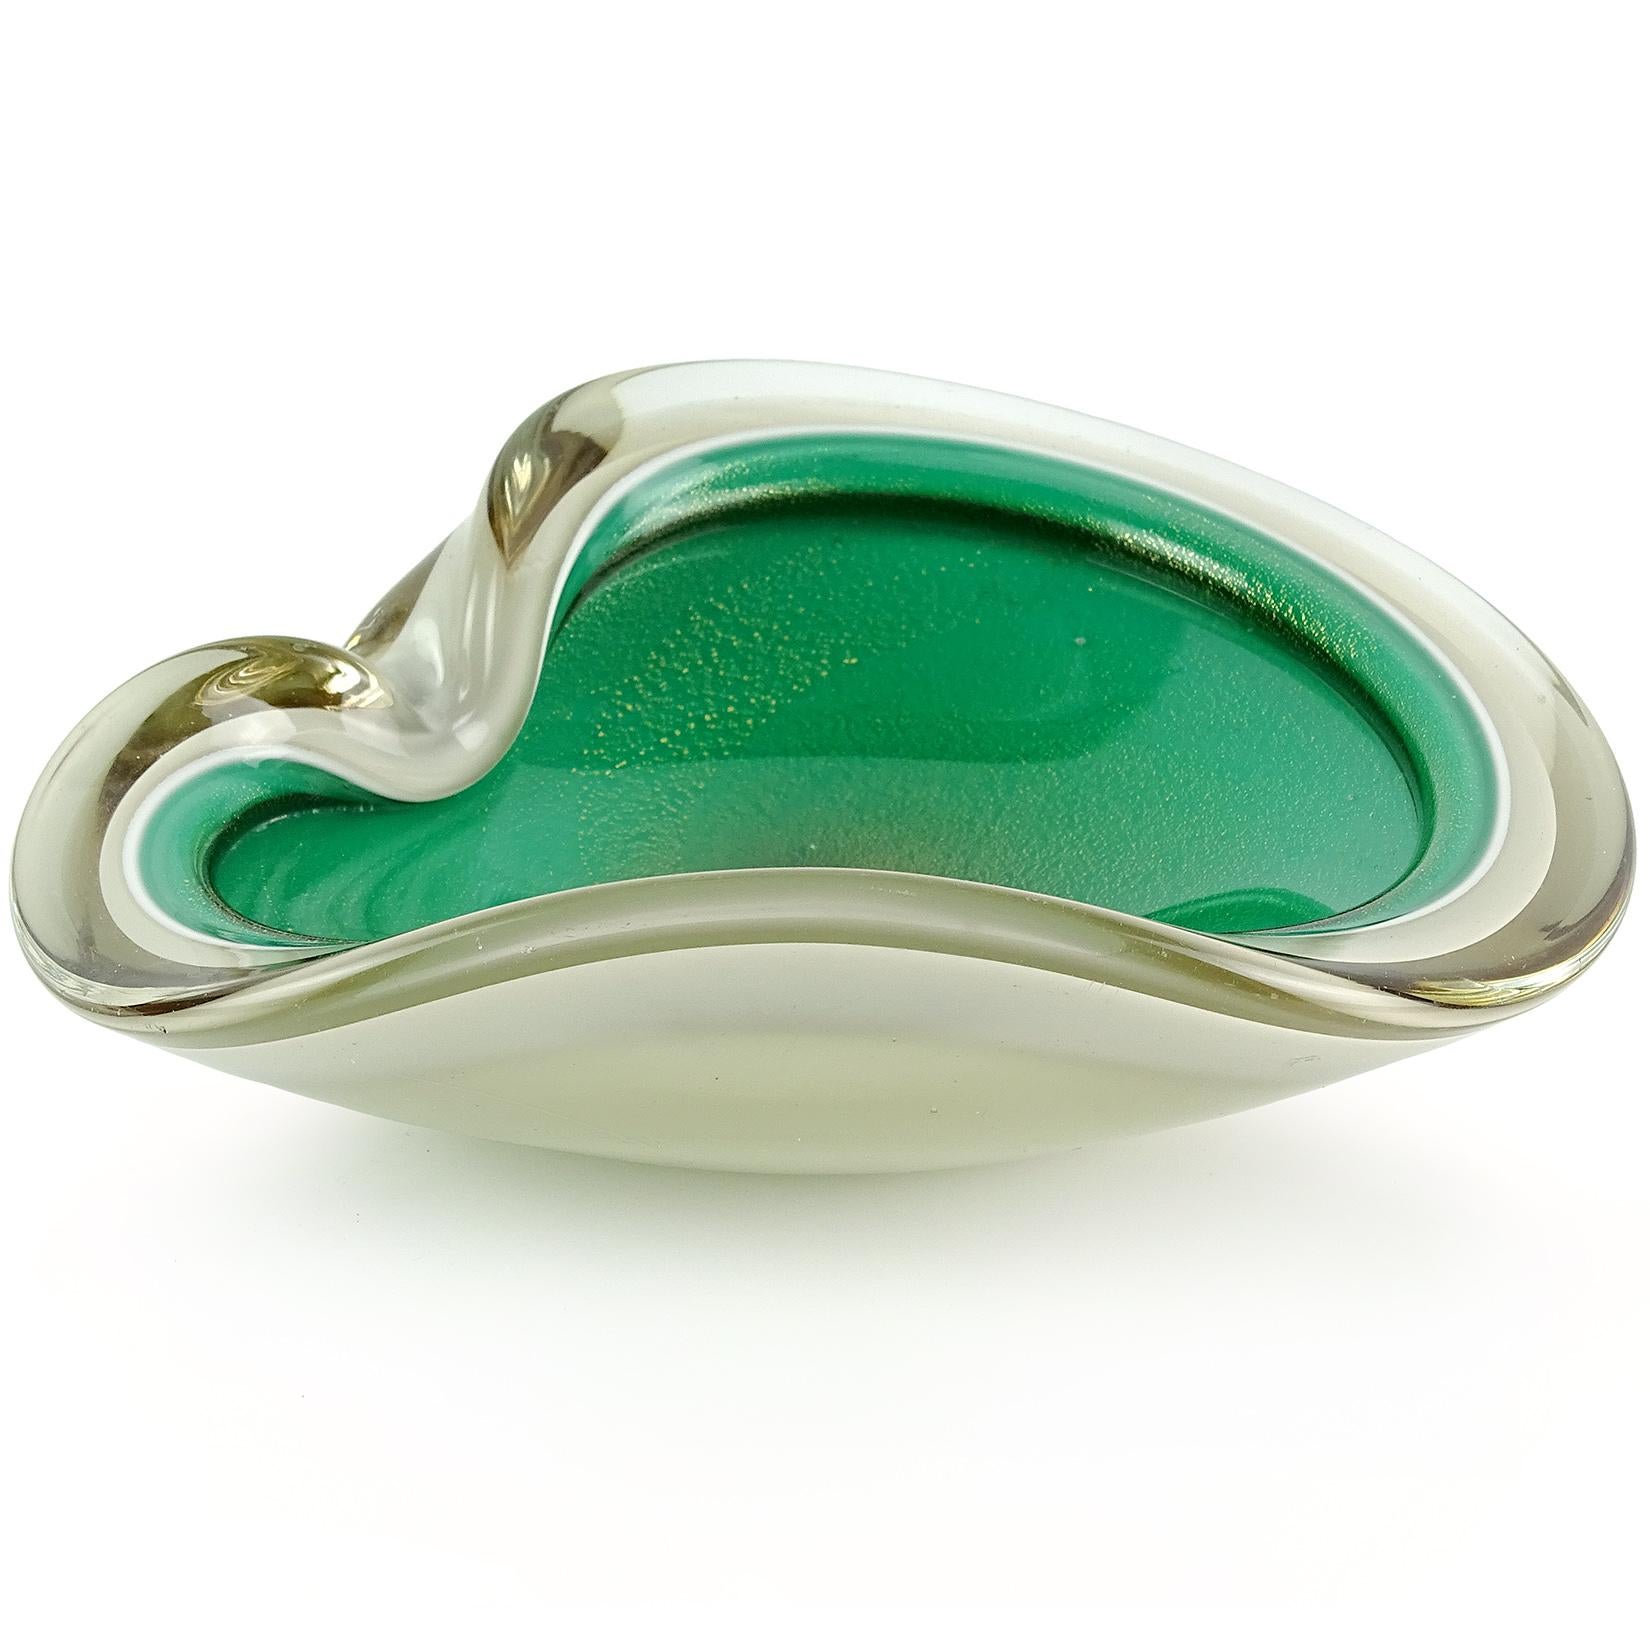 Beautiful Murano hand blown light tan / taupe over green and gold flecks Italian art glass decorative bowl. Made with 4 layers, with clear layer outside, and white layer between the colors. It has a folded over rim, and indent on the side. The bowl